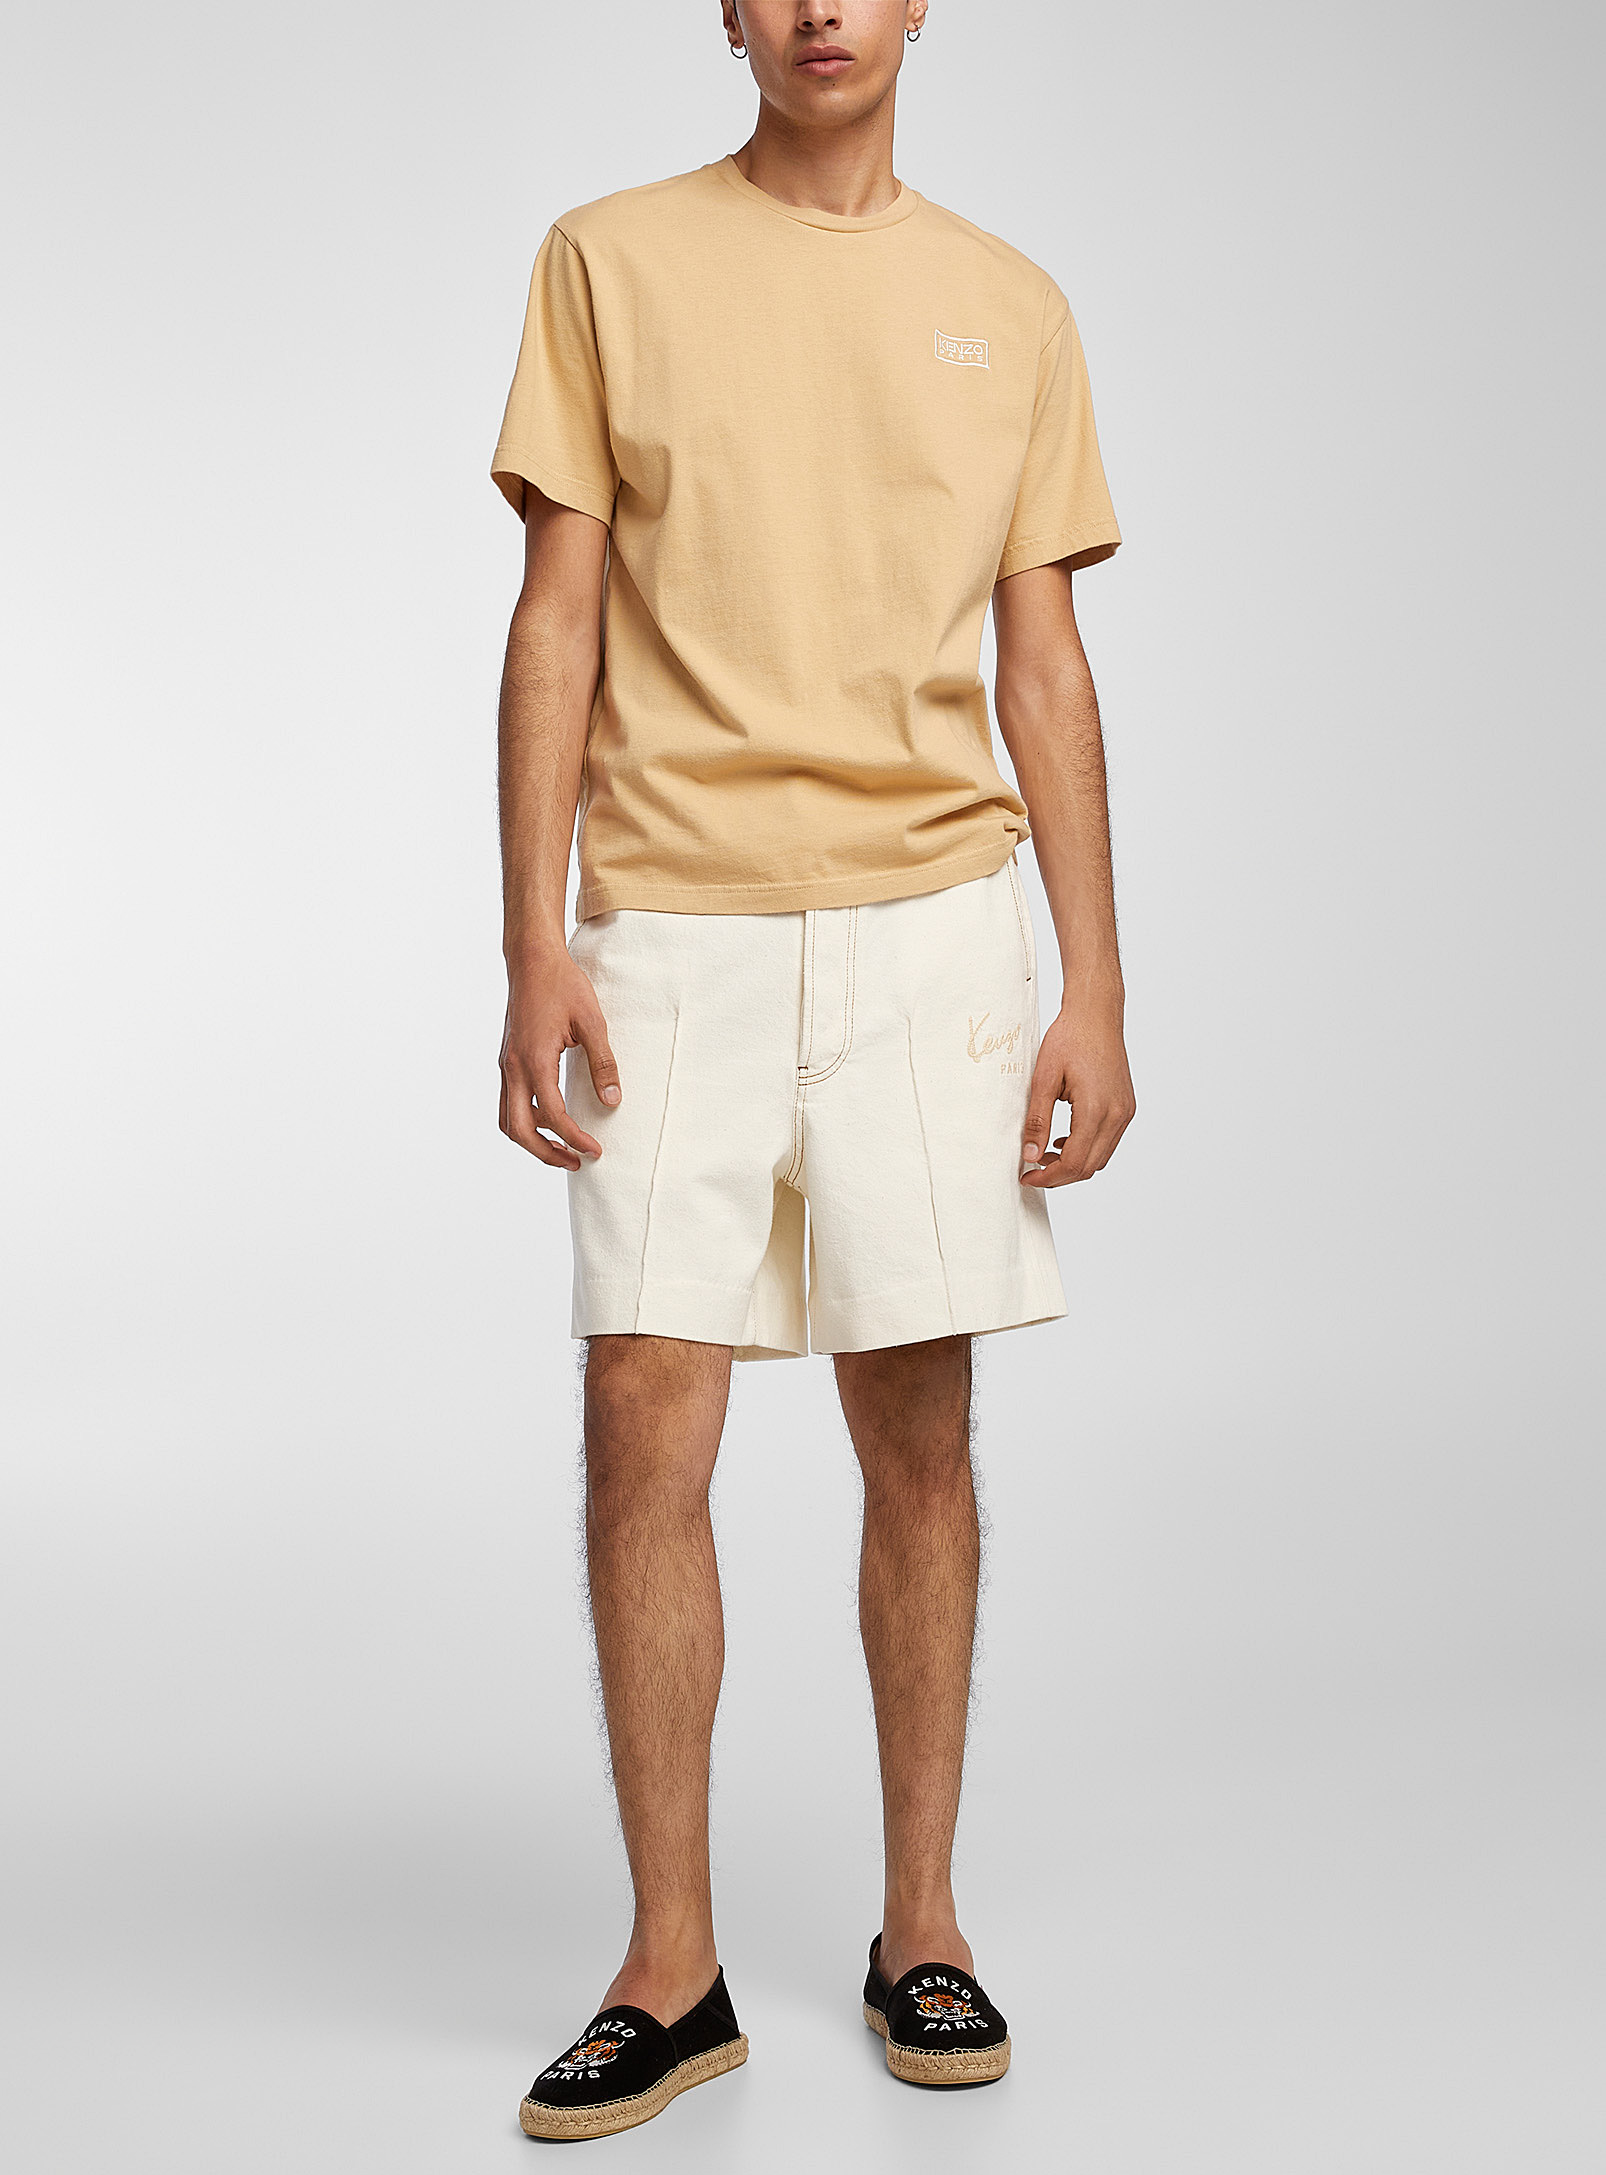 Kenzo Créations Denim Bermuda Shorts In Off White